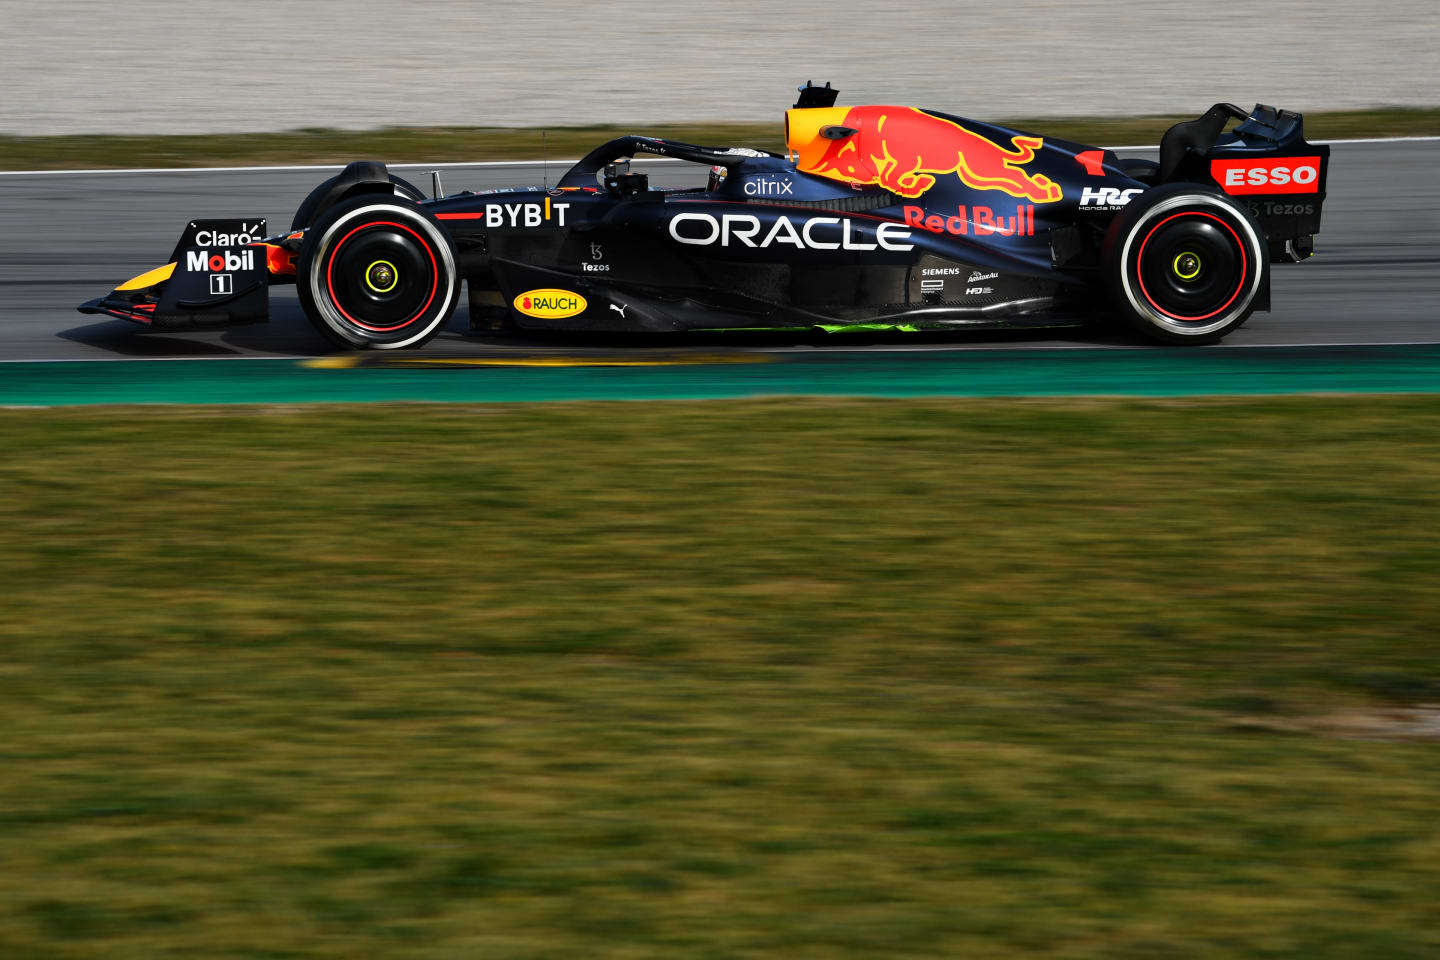 BARCELONA, SPAIN - FEBRUARY 23: Max Verstappen of the Netherlands driving the (1) Oracle Red Bull